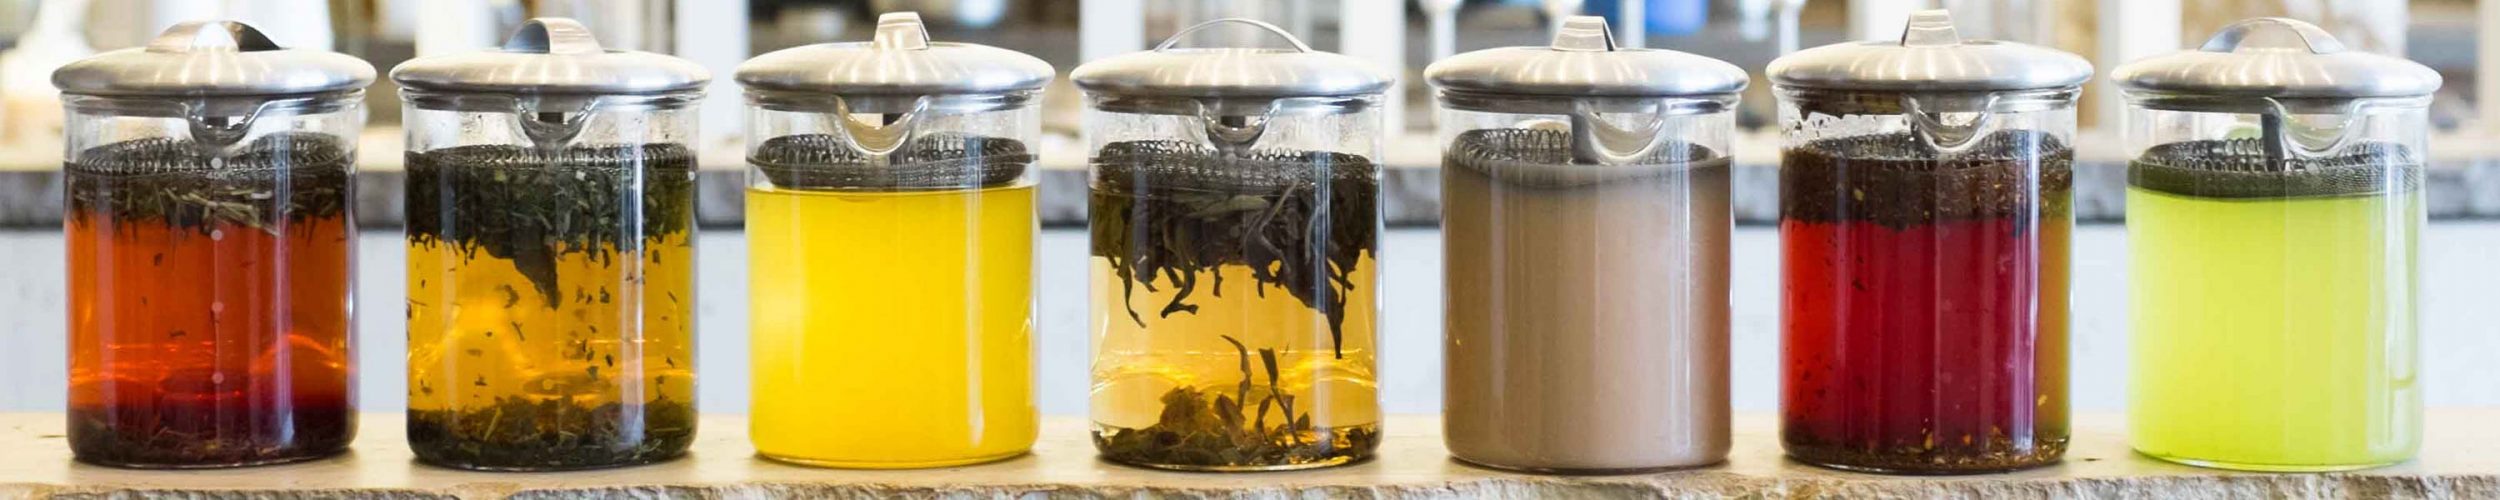 Seven different teas being brewed in glass teapots